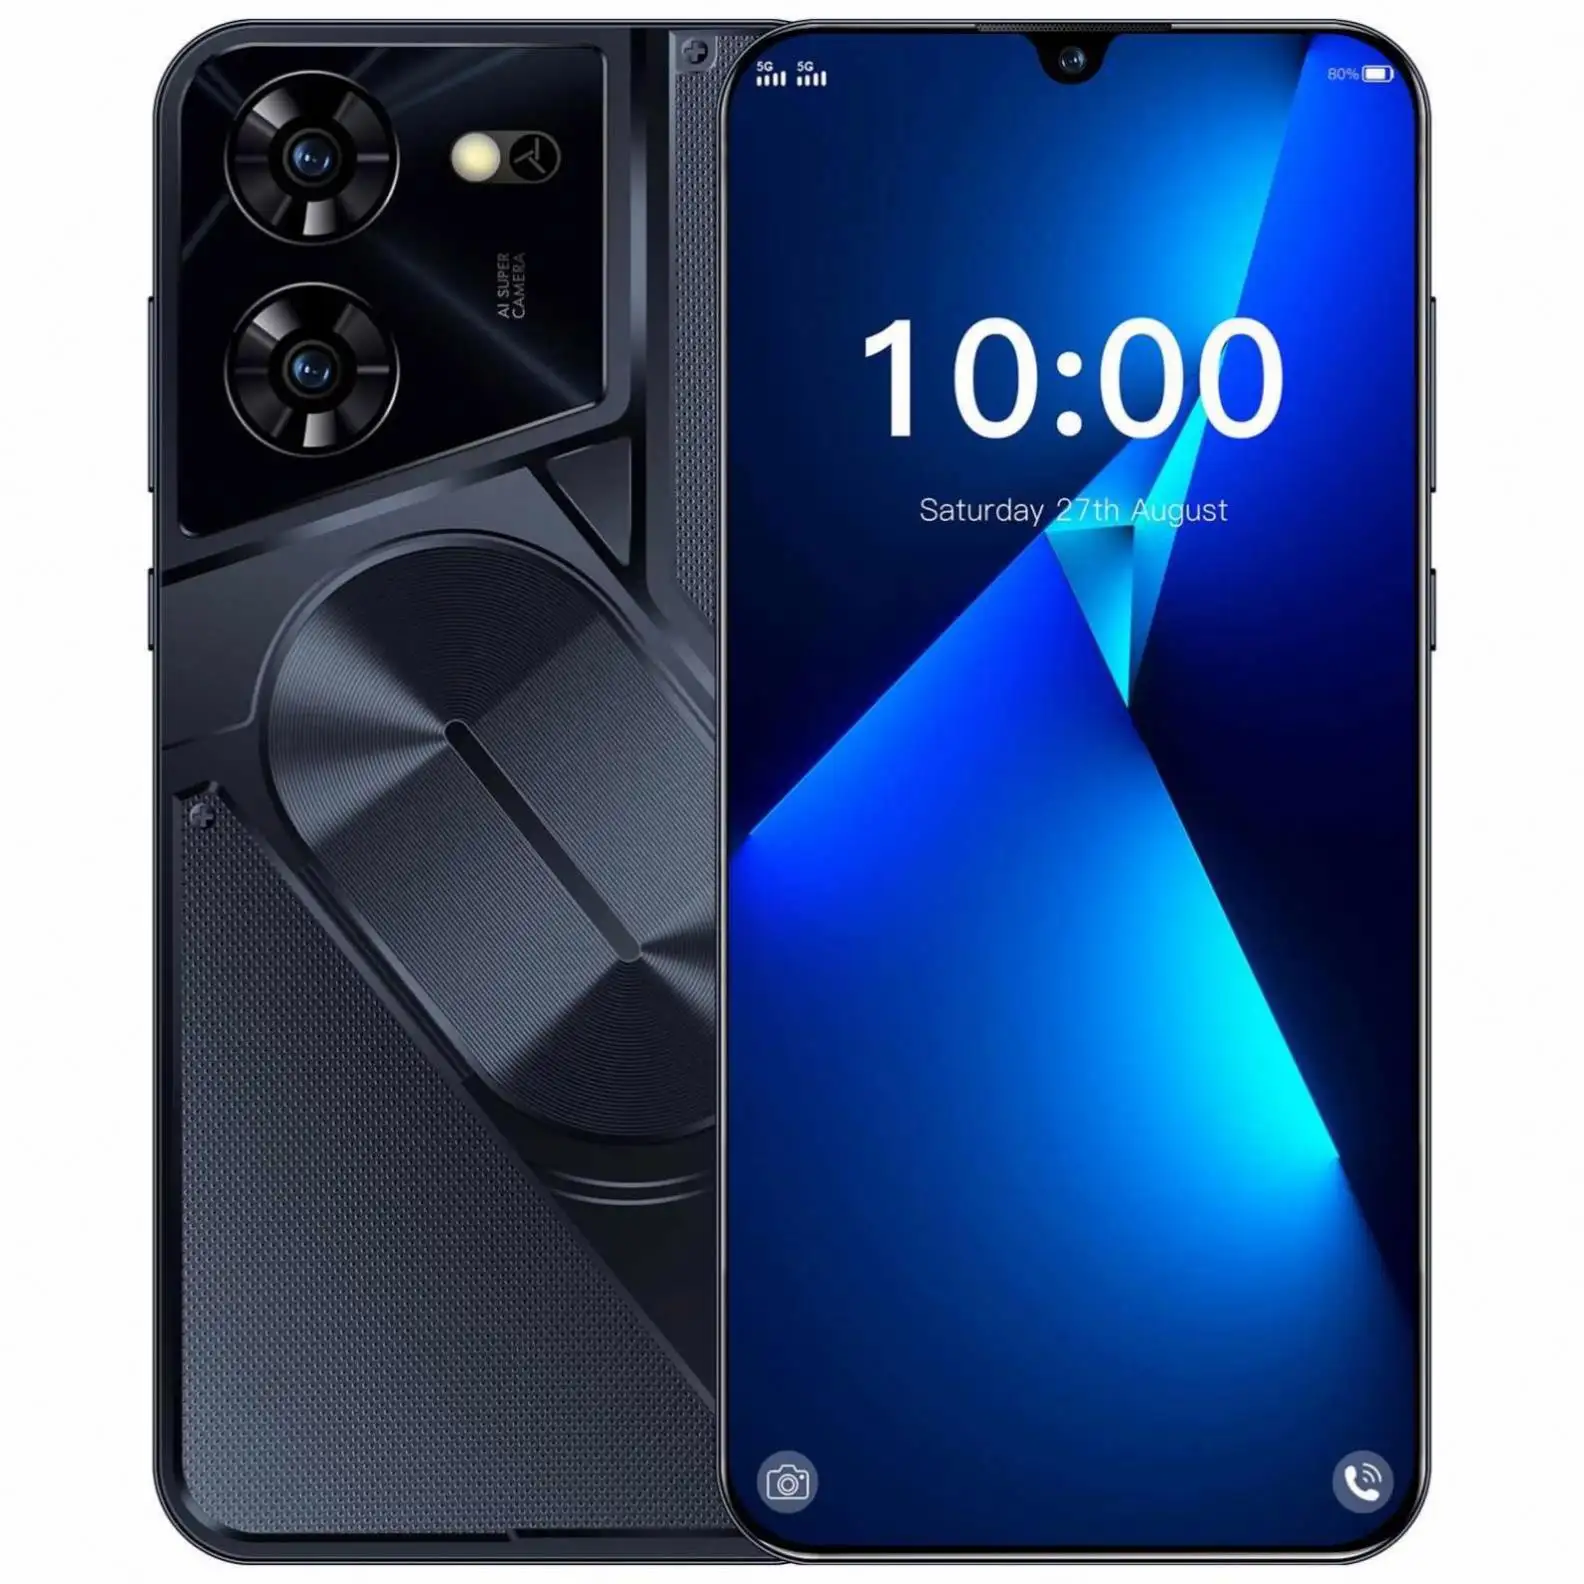 t camon 19 neo back cover fold phone android 5g smartphone pova 5 pro ps5 video game console